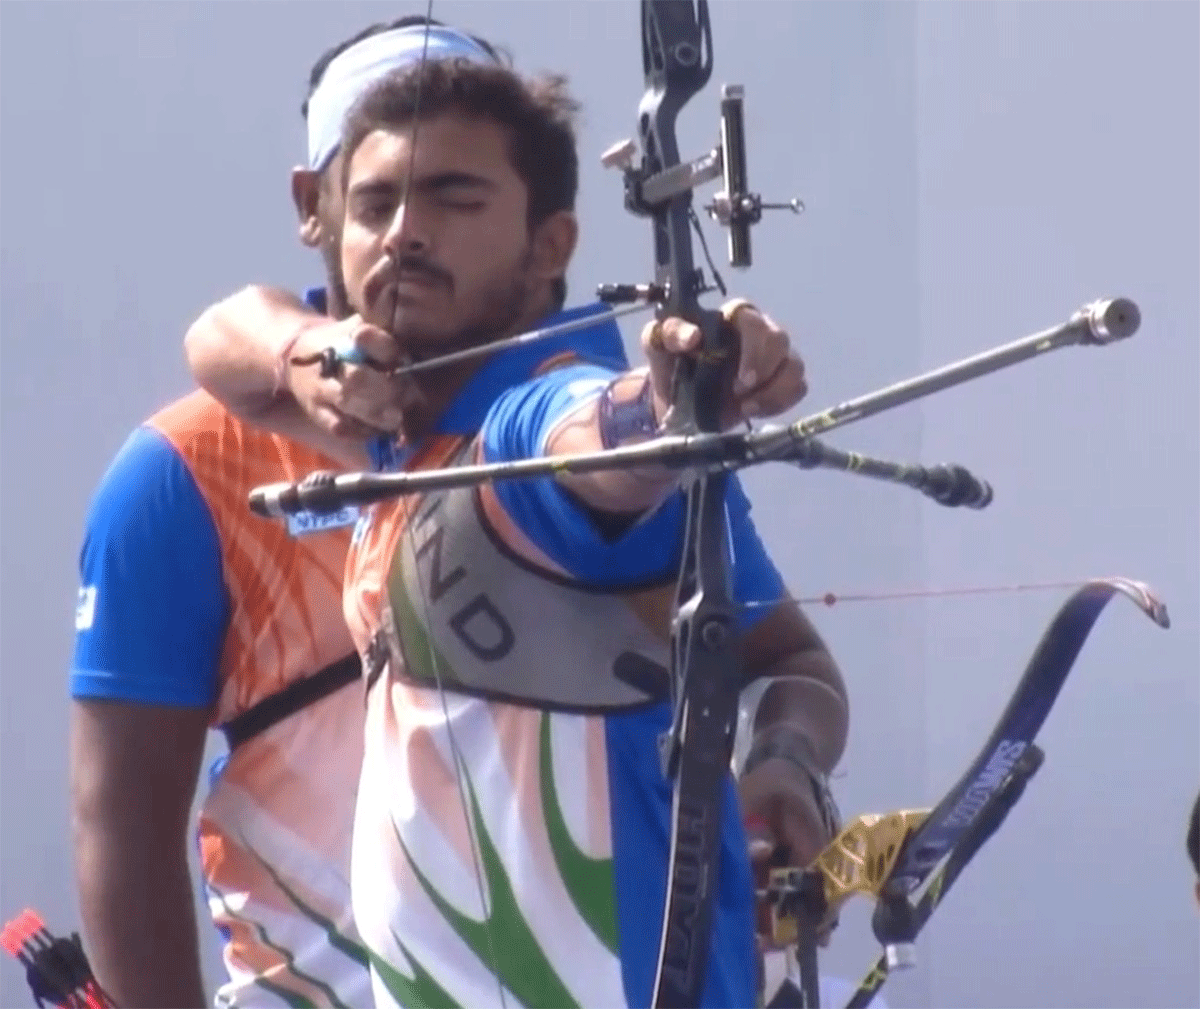 Parth Salunkhe and his teammate Ridhi Phor will face Bangladesh in the mixed recurve final on Saturday